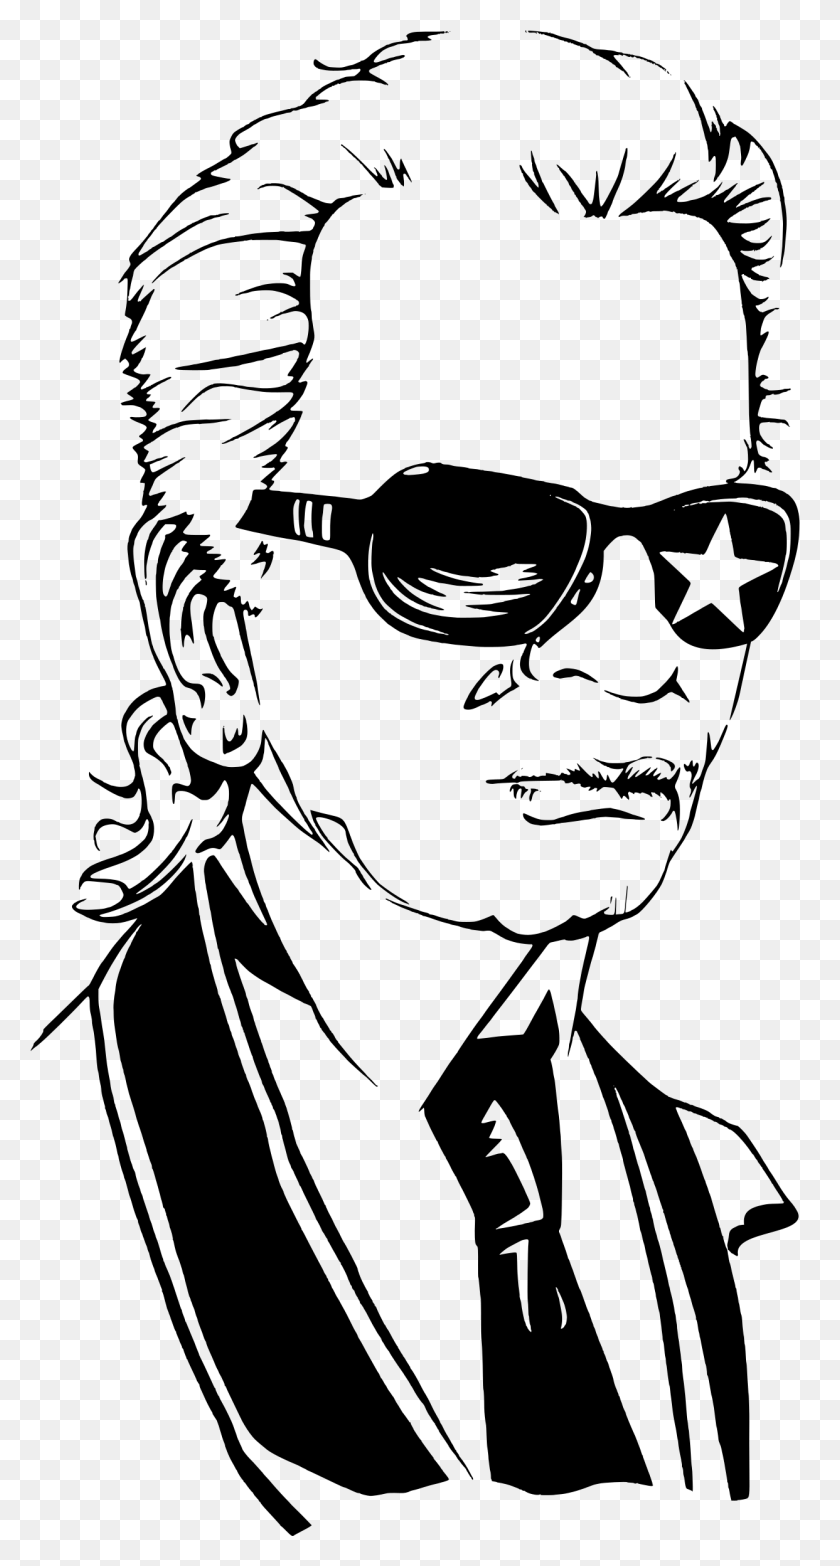 1243x2401 This Free Icons Design Of Karl Lagerfeld Karl Lagerfeld, Grey, World Of Warcraft Hd Png